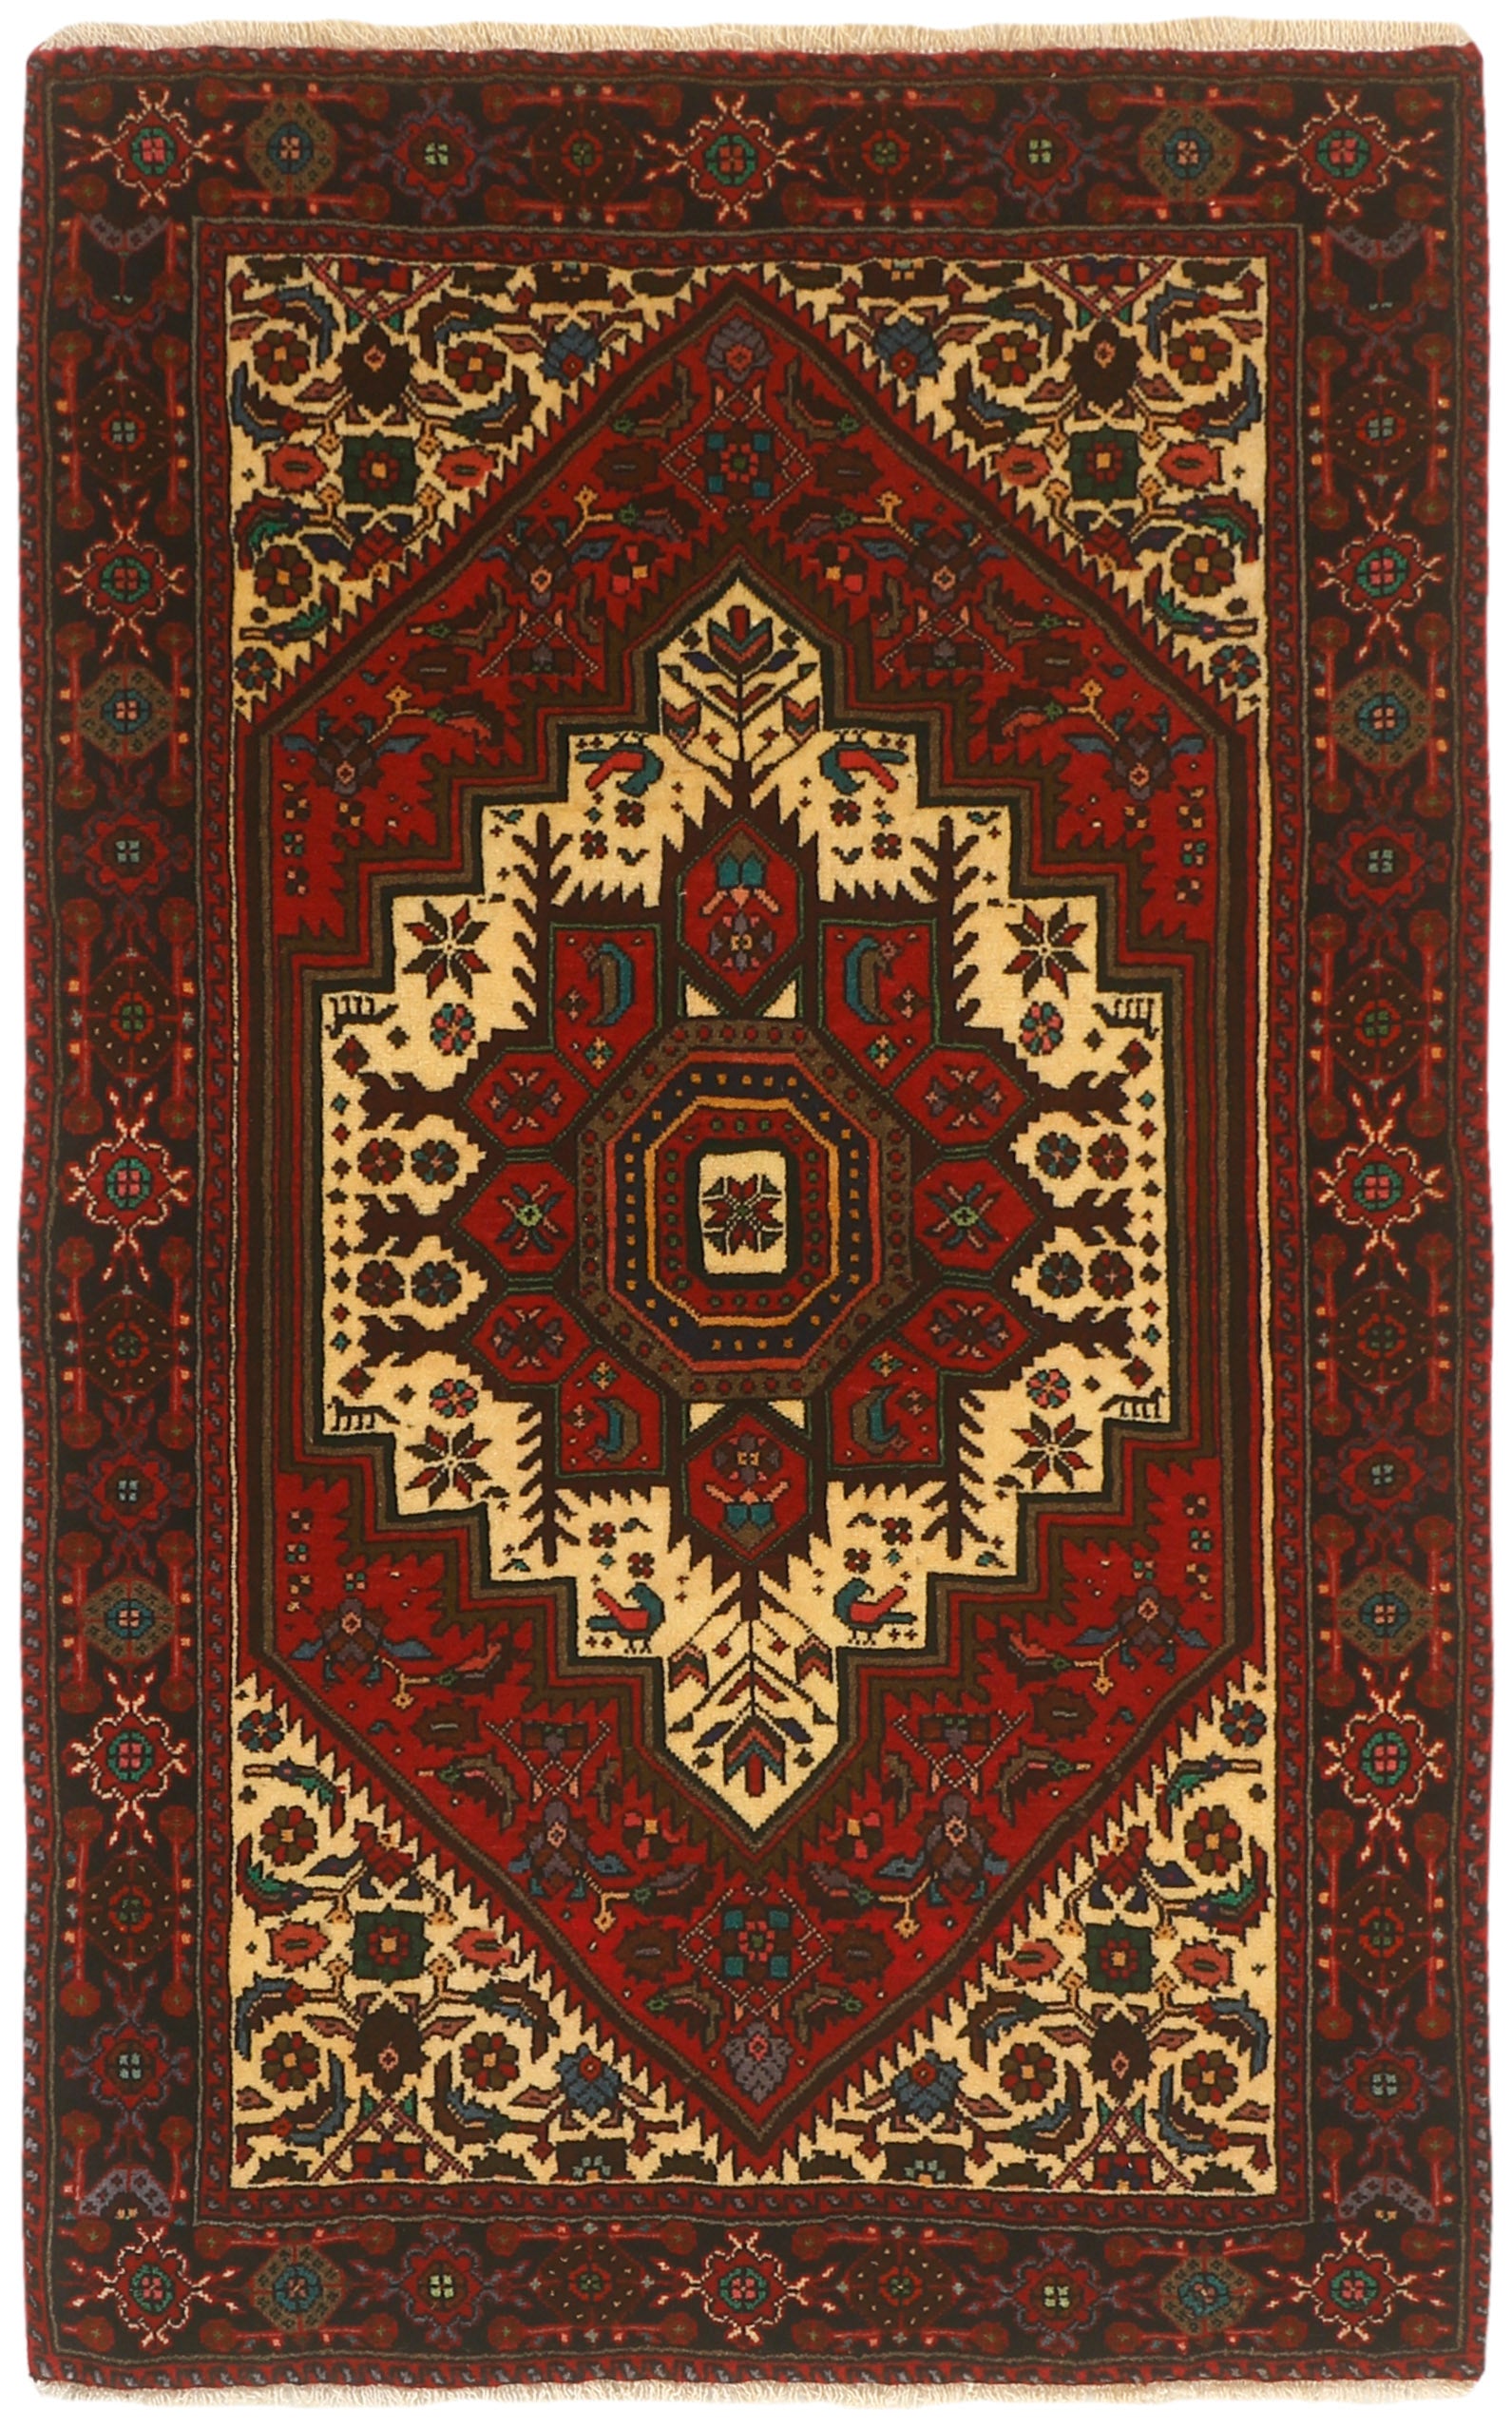 Red and beige persian rug with a floral design